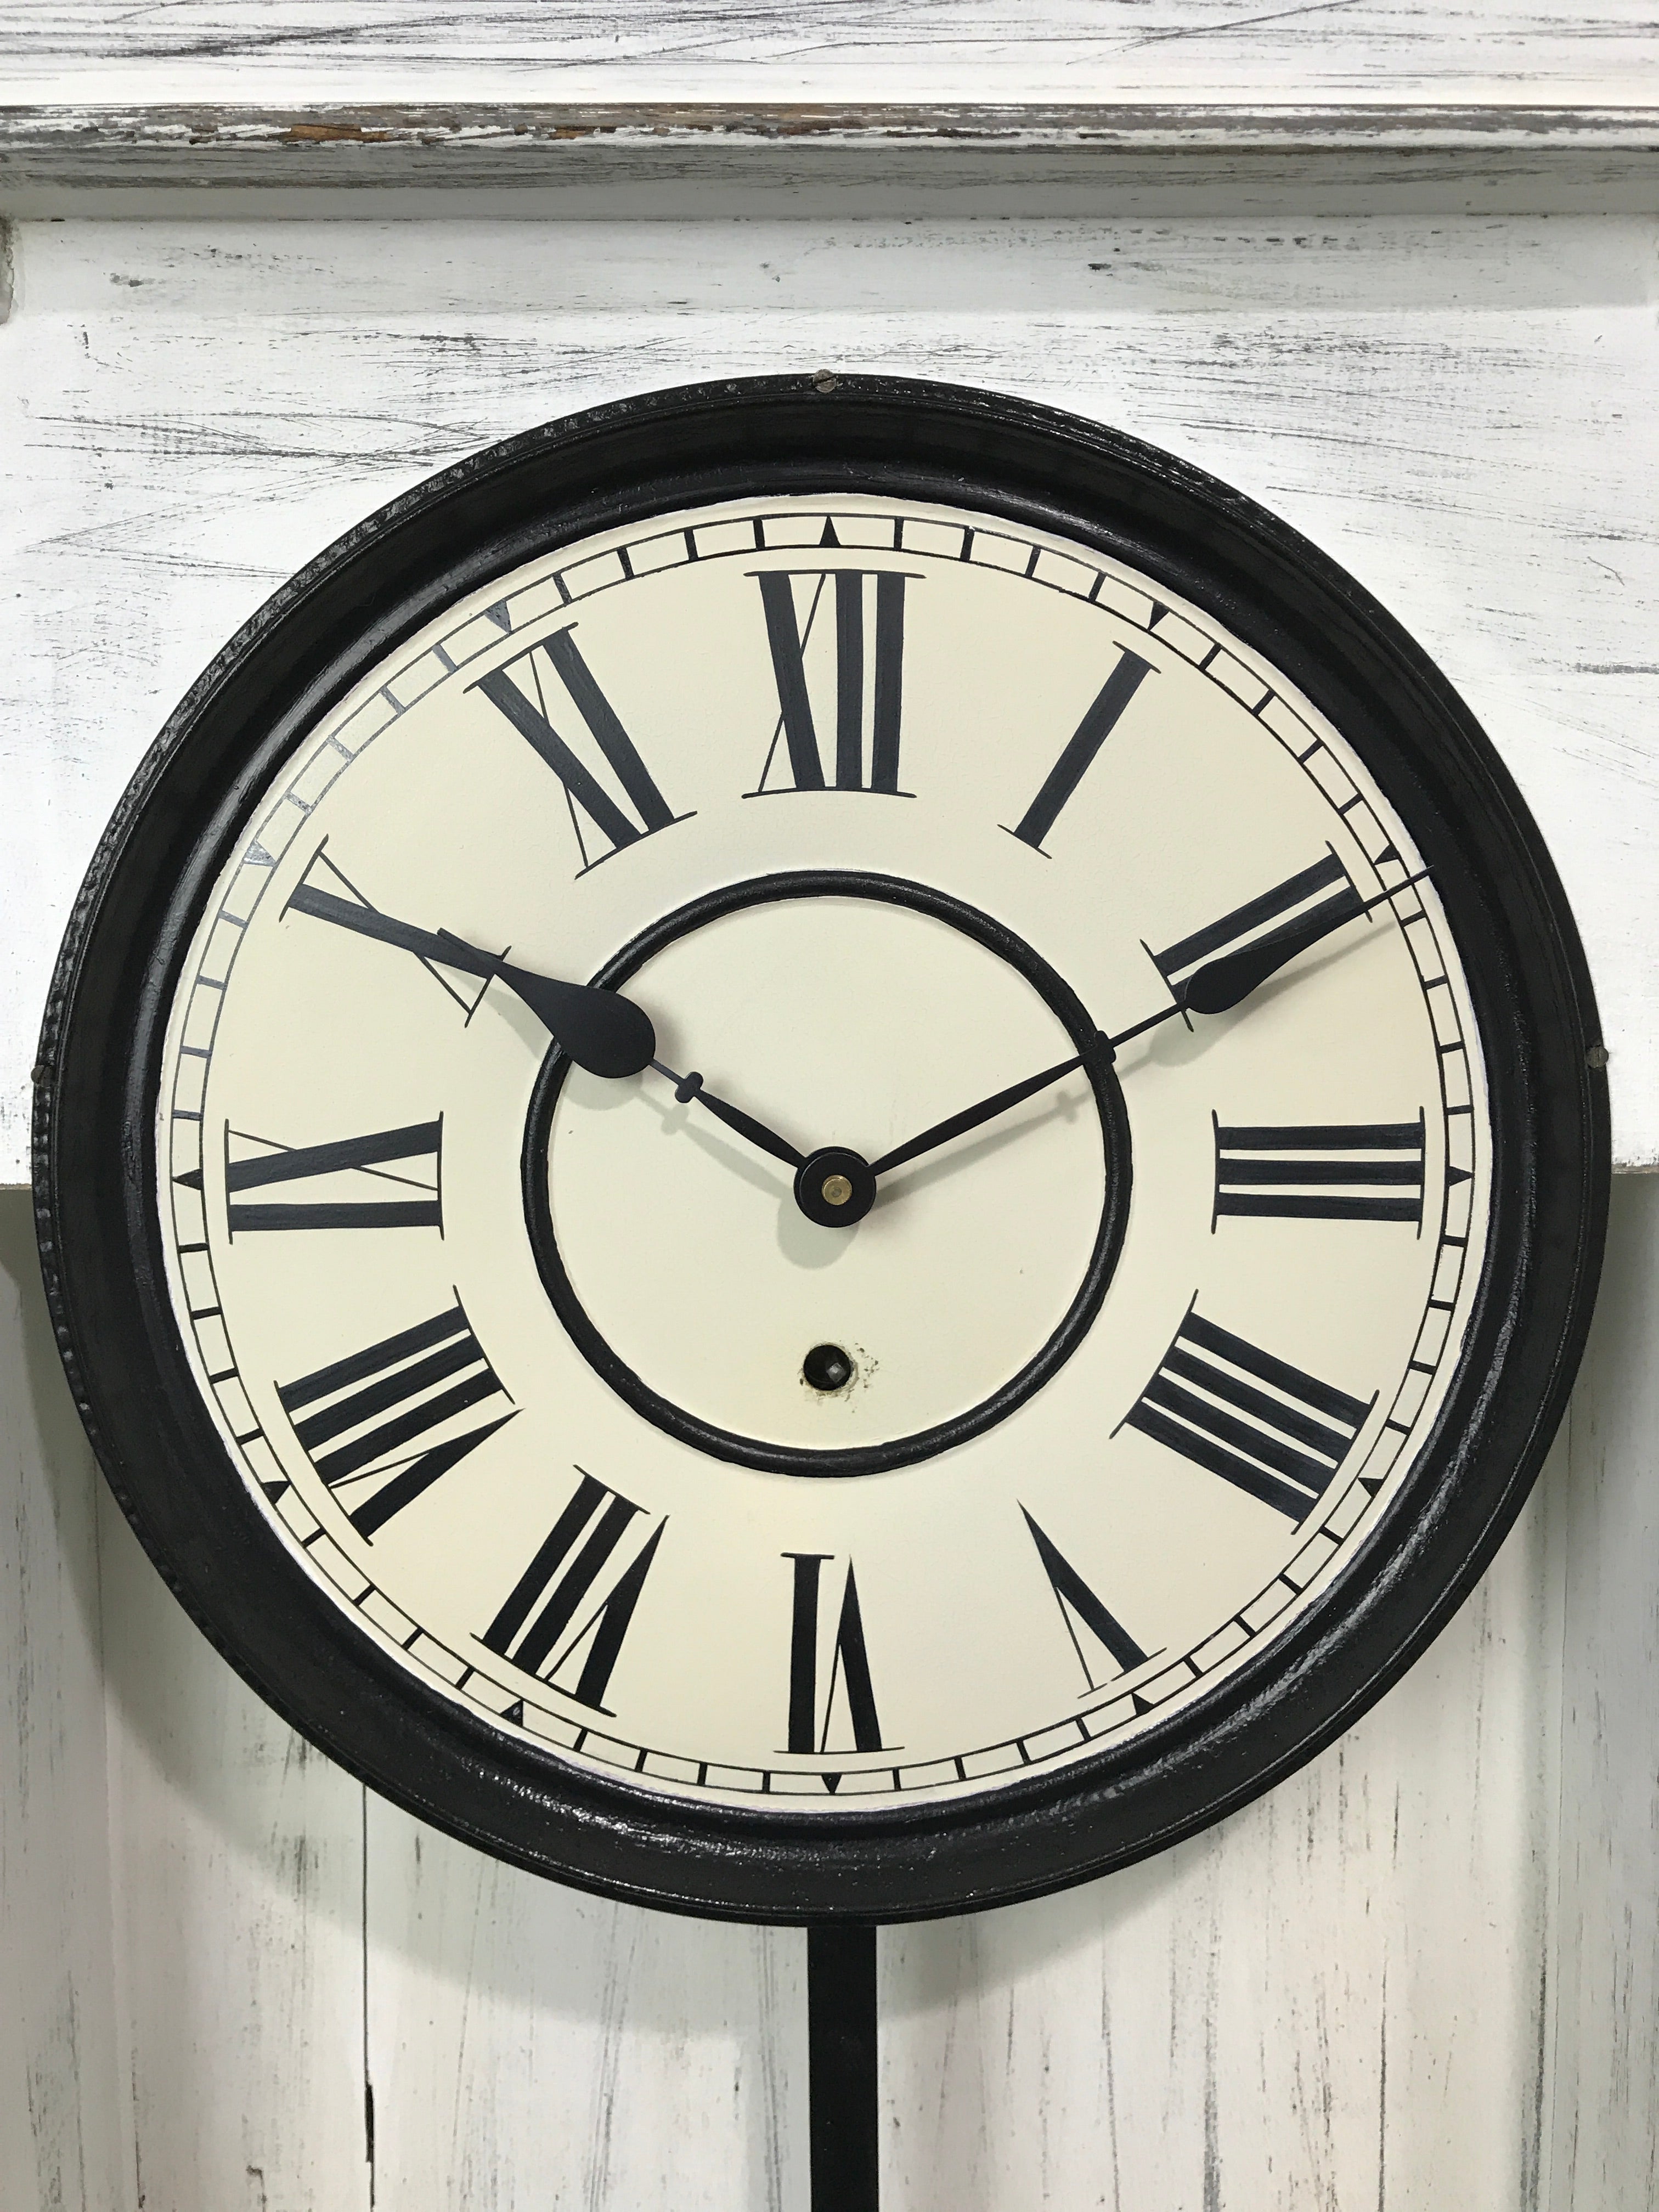 Antique SESSIONS Wall Clock | eXibit collection